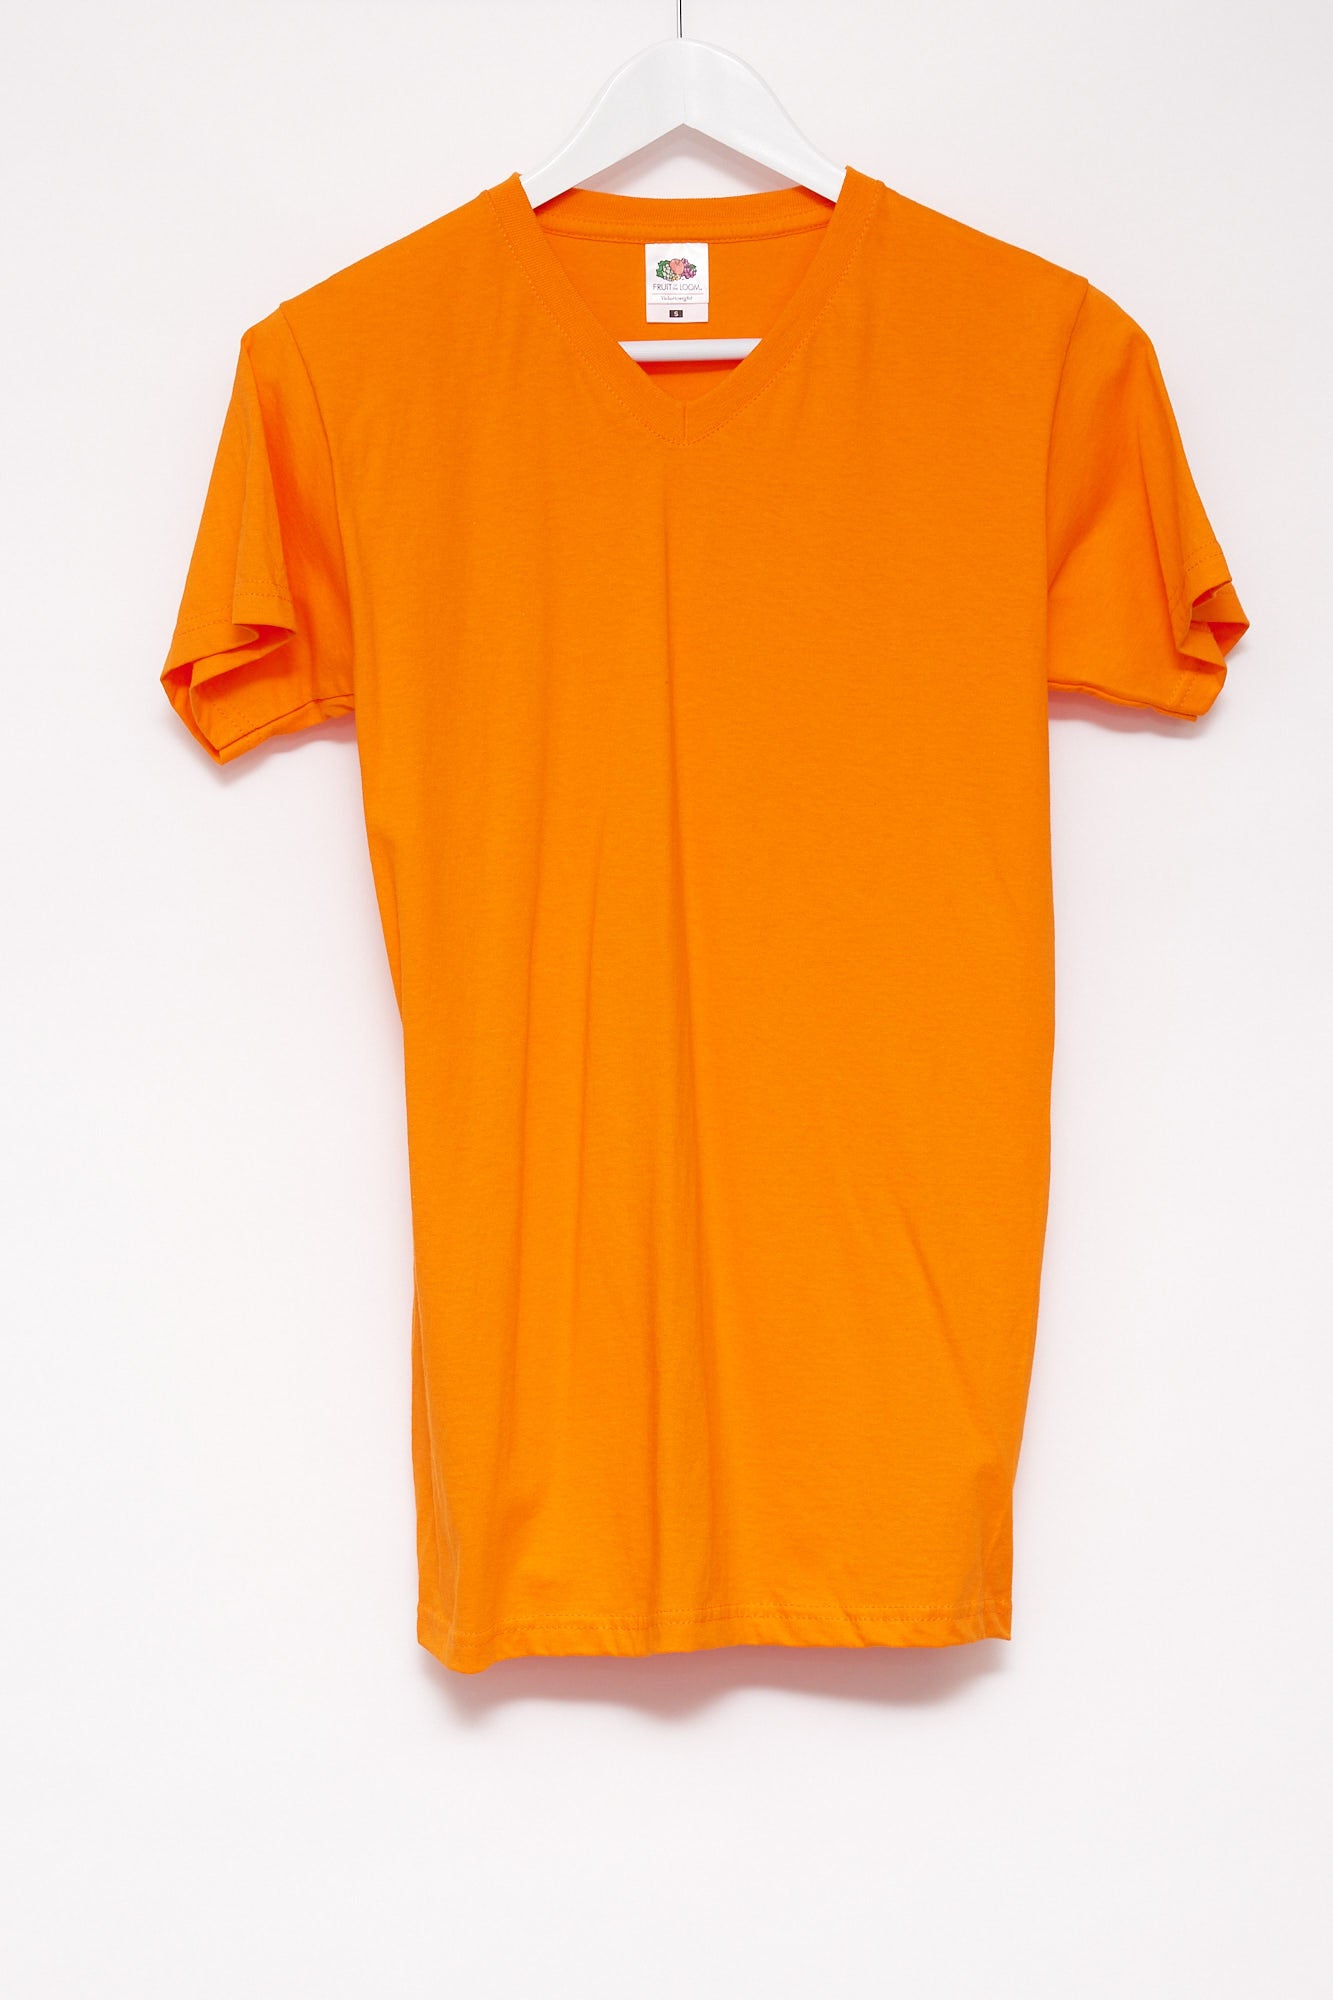 Mens Fruit of the Loom Orange T-shirt: size Small